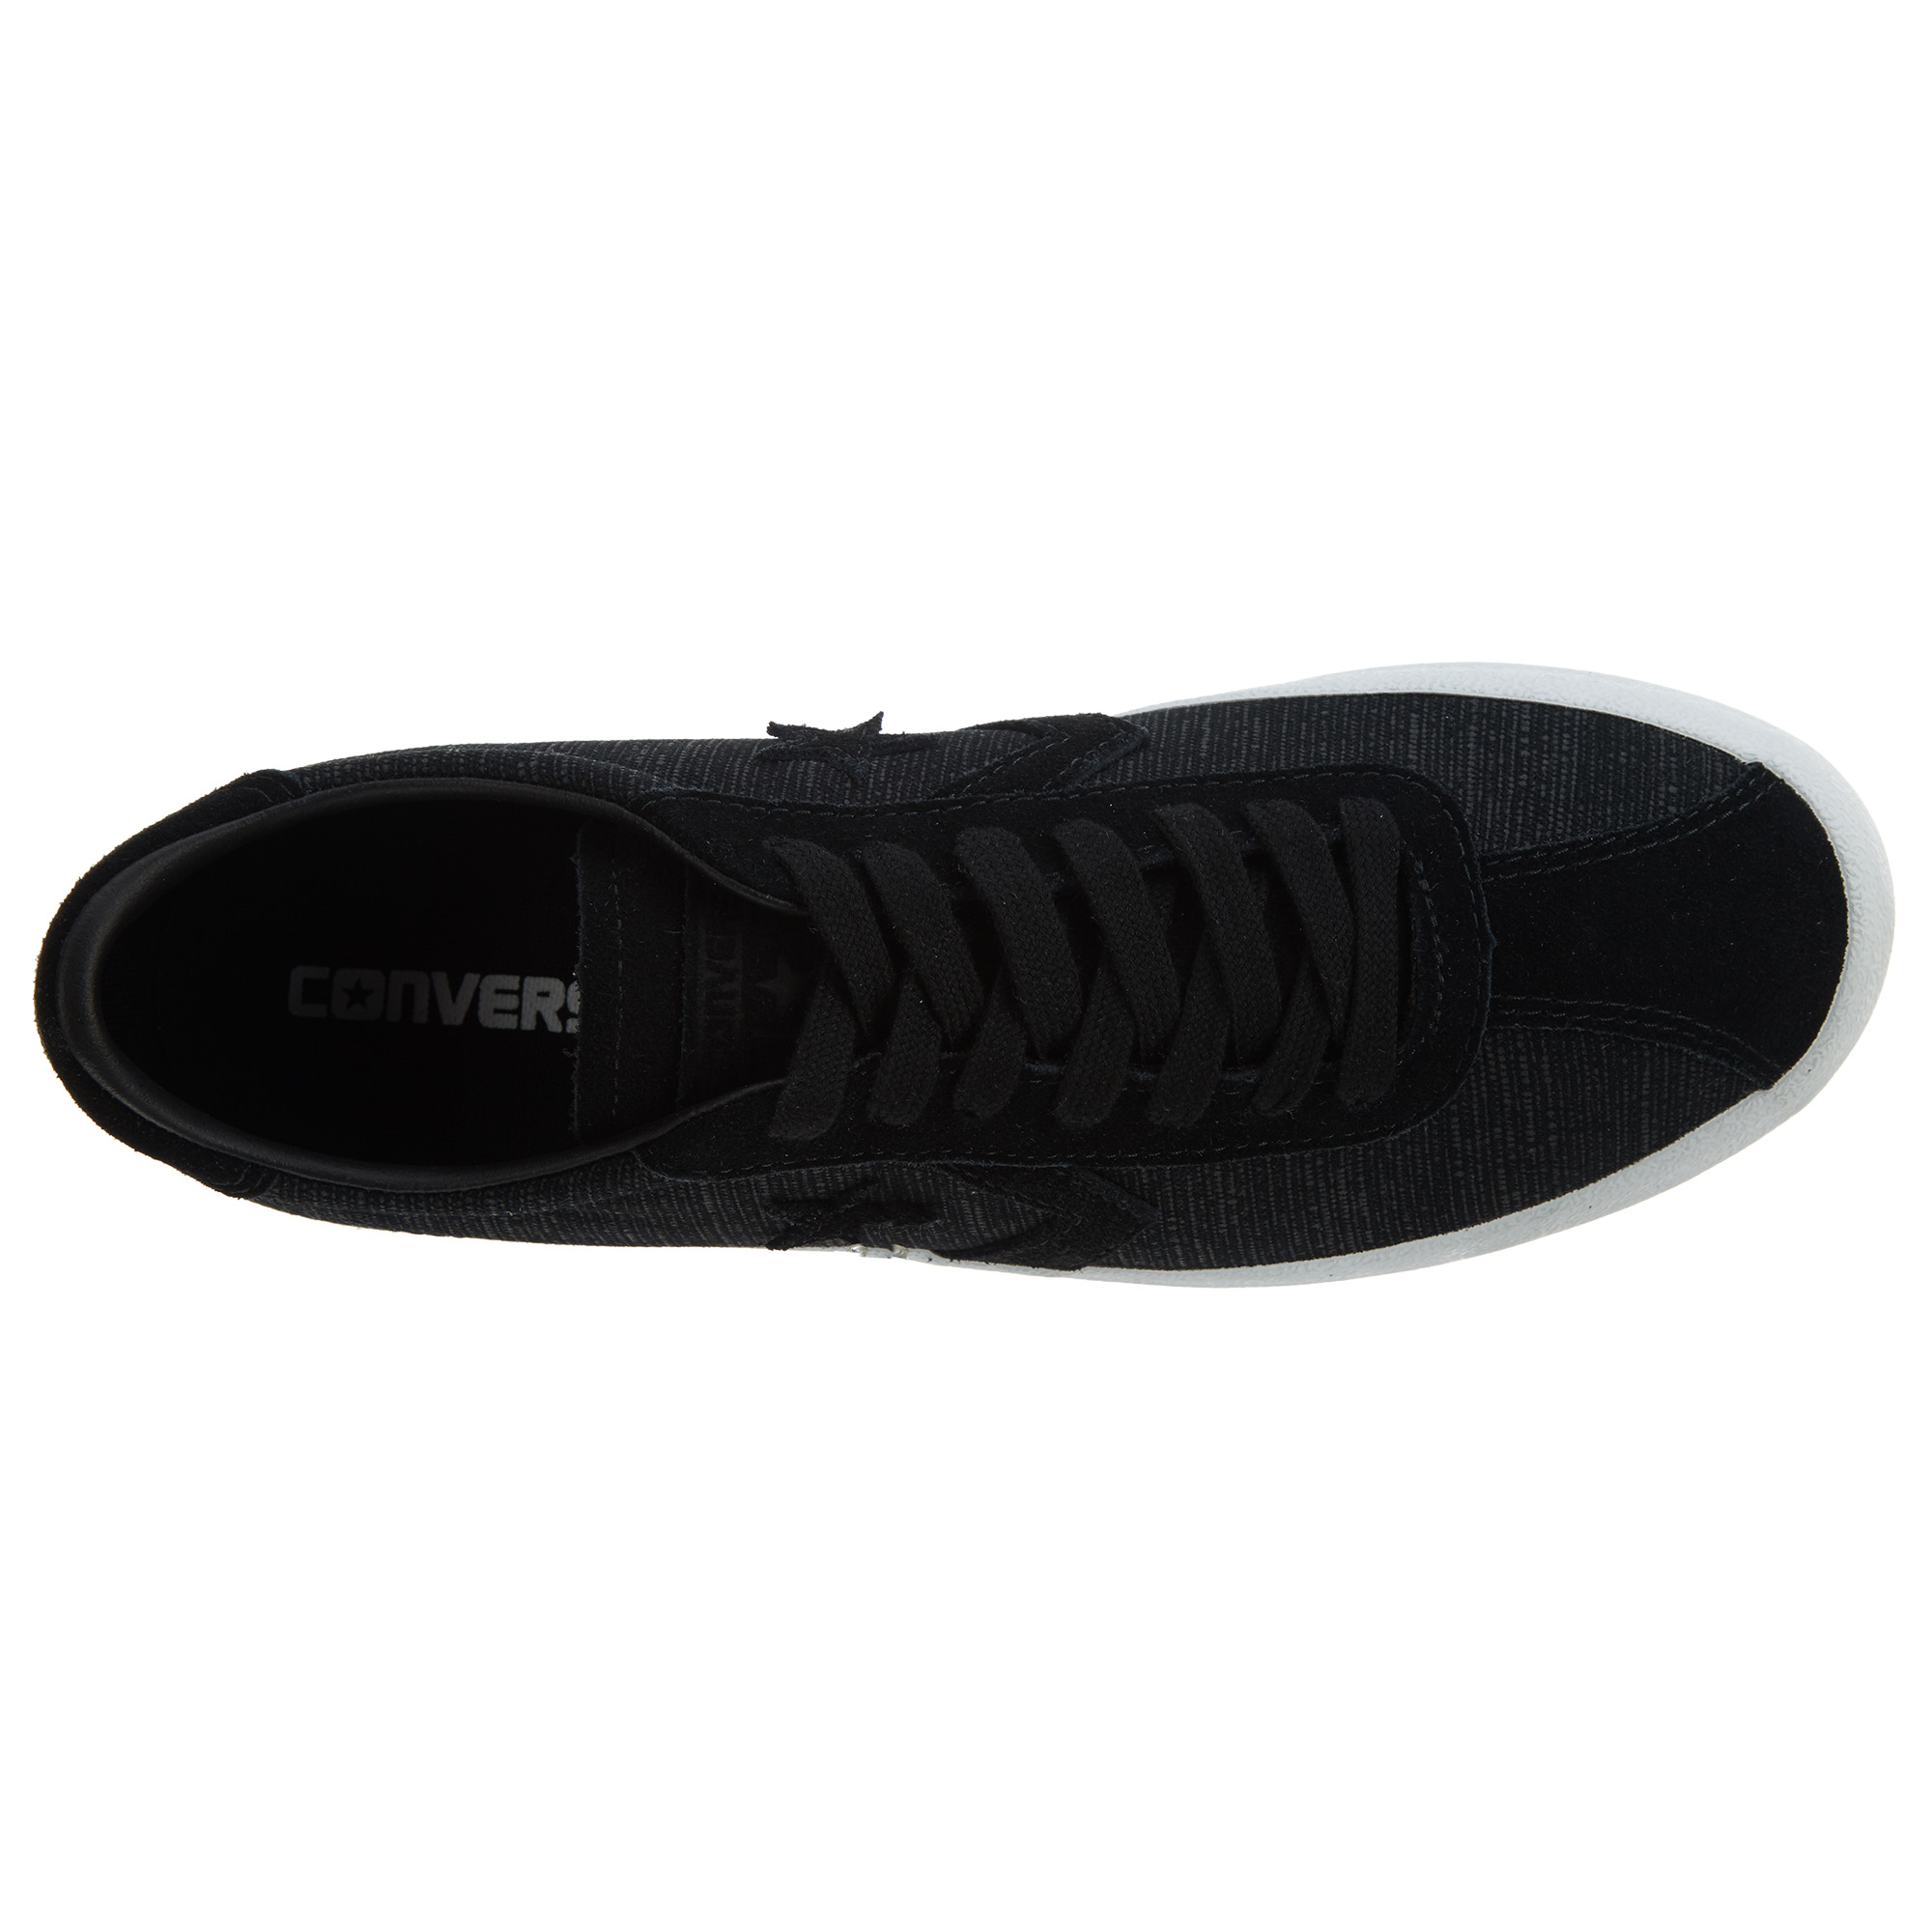 Converse Breakpoint Oxford Unisex Style : 155581c - image 3 of 7